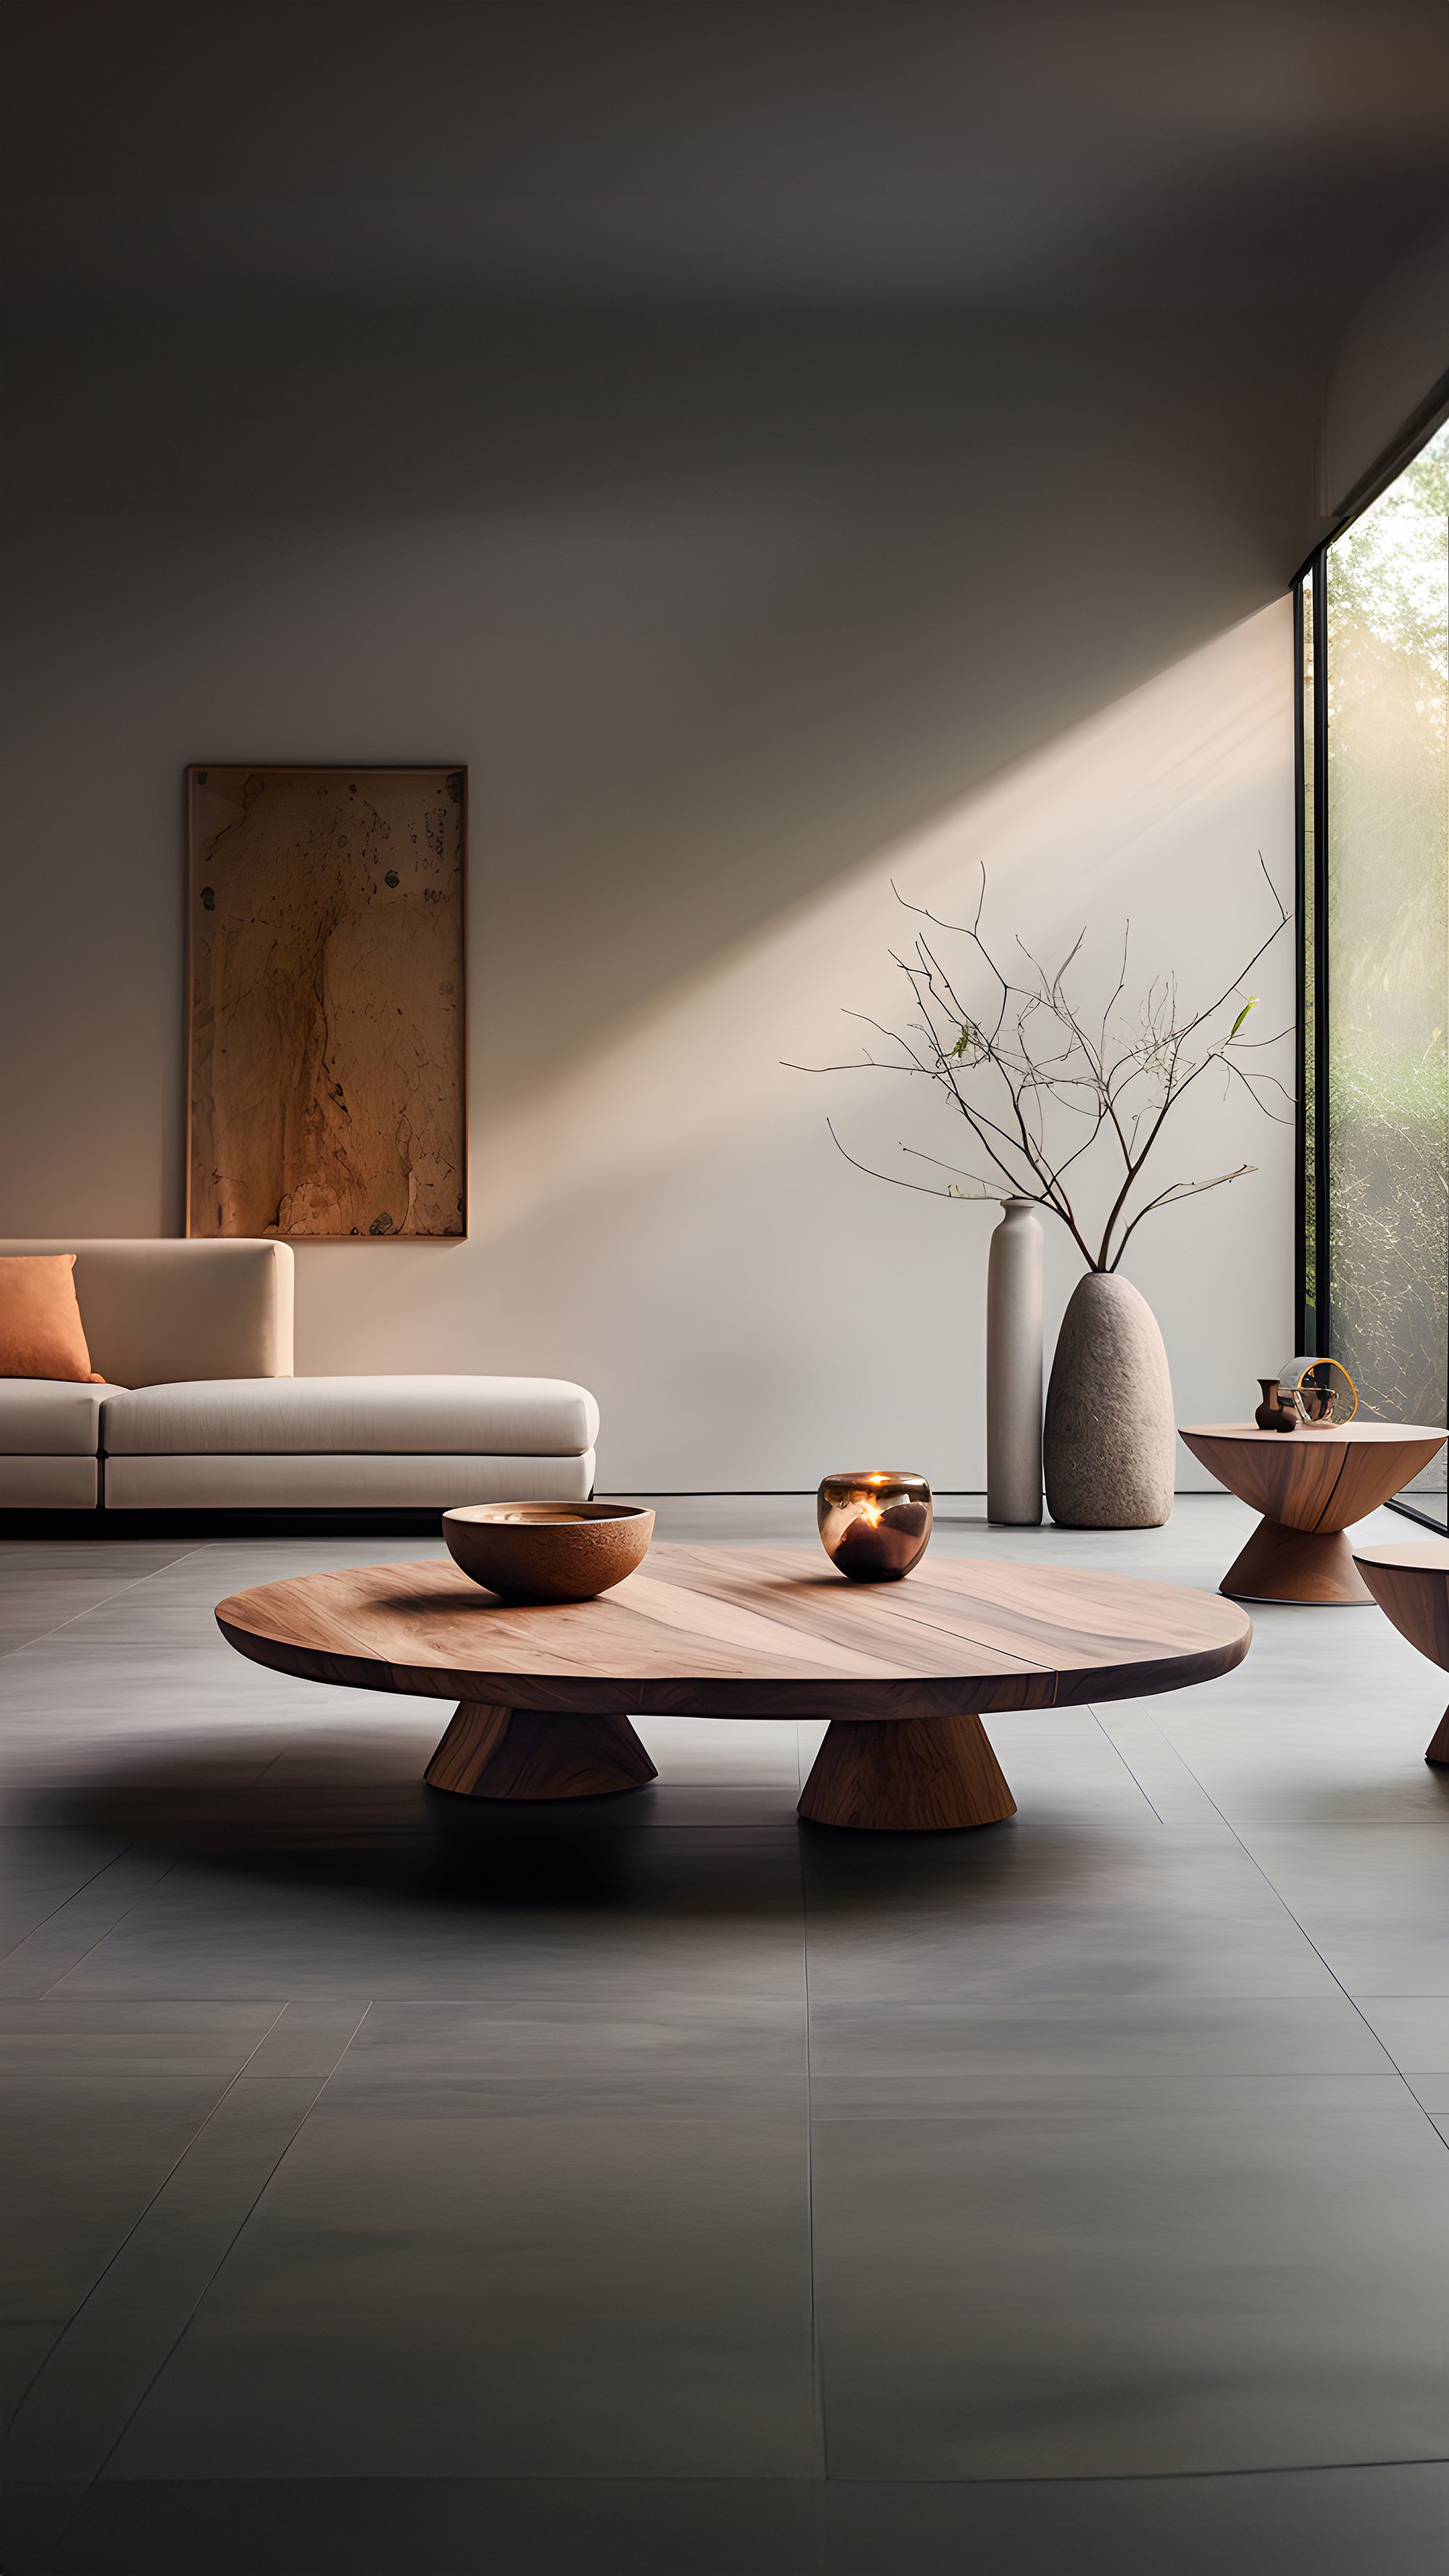 Sculptural Coffee Table Made of Solid Wood, Center Table Solace S45 by Joel Escalona — 9.jpg